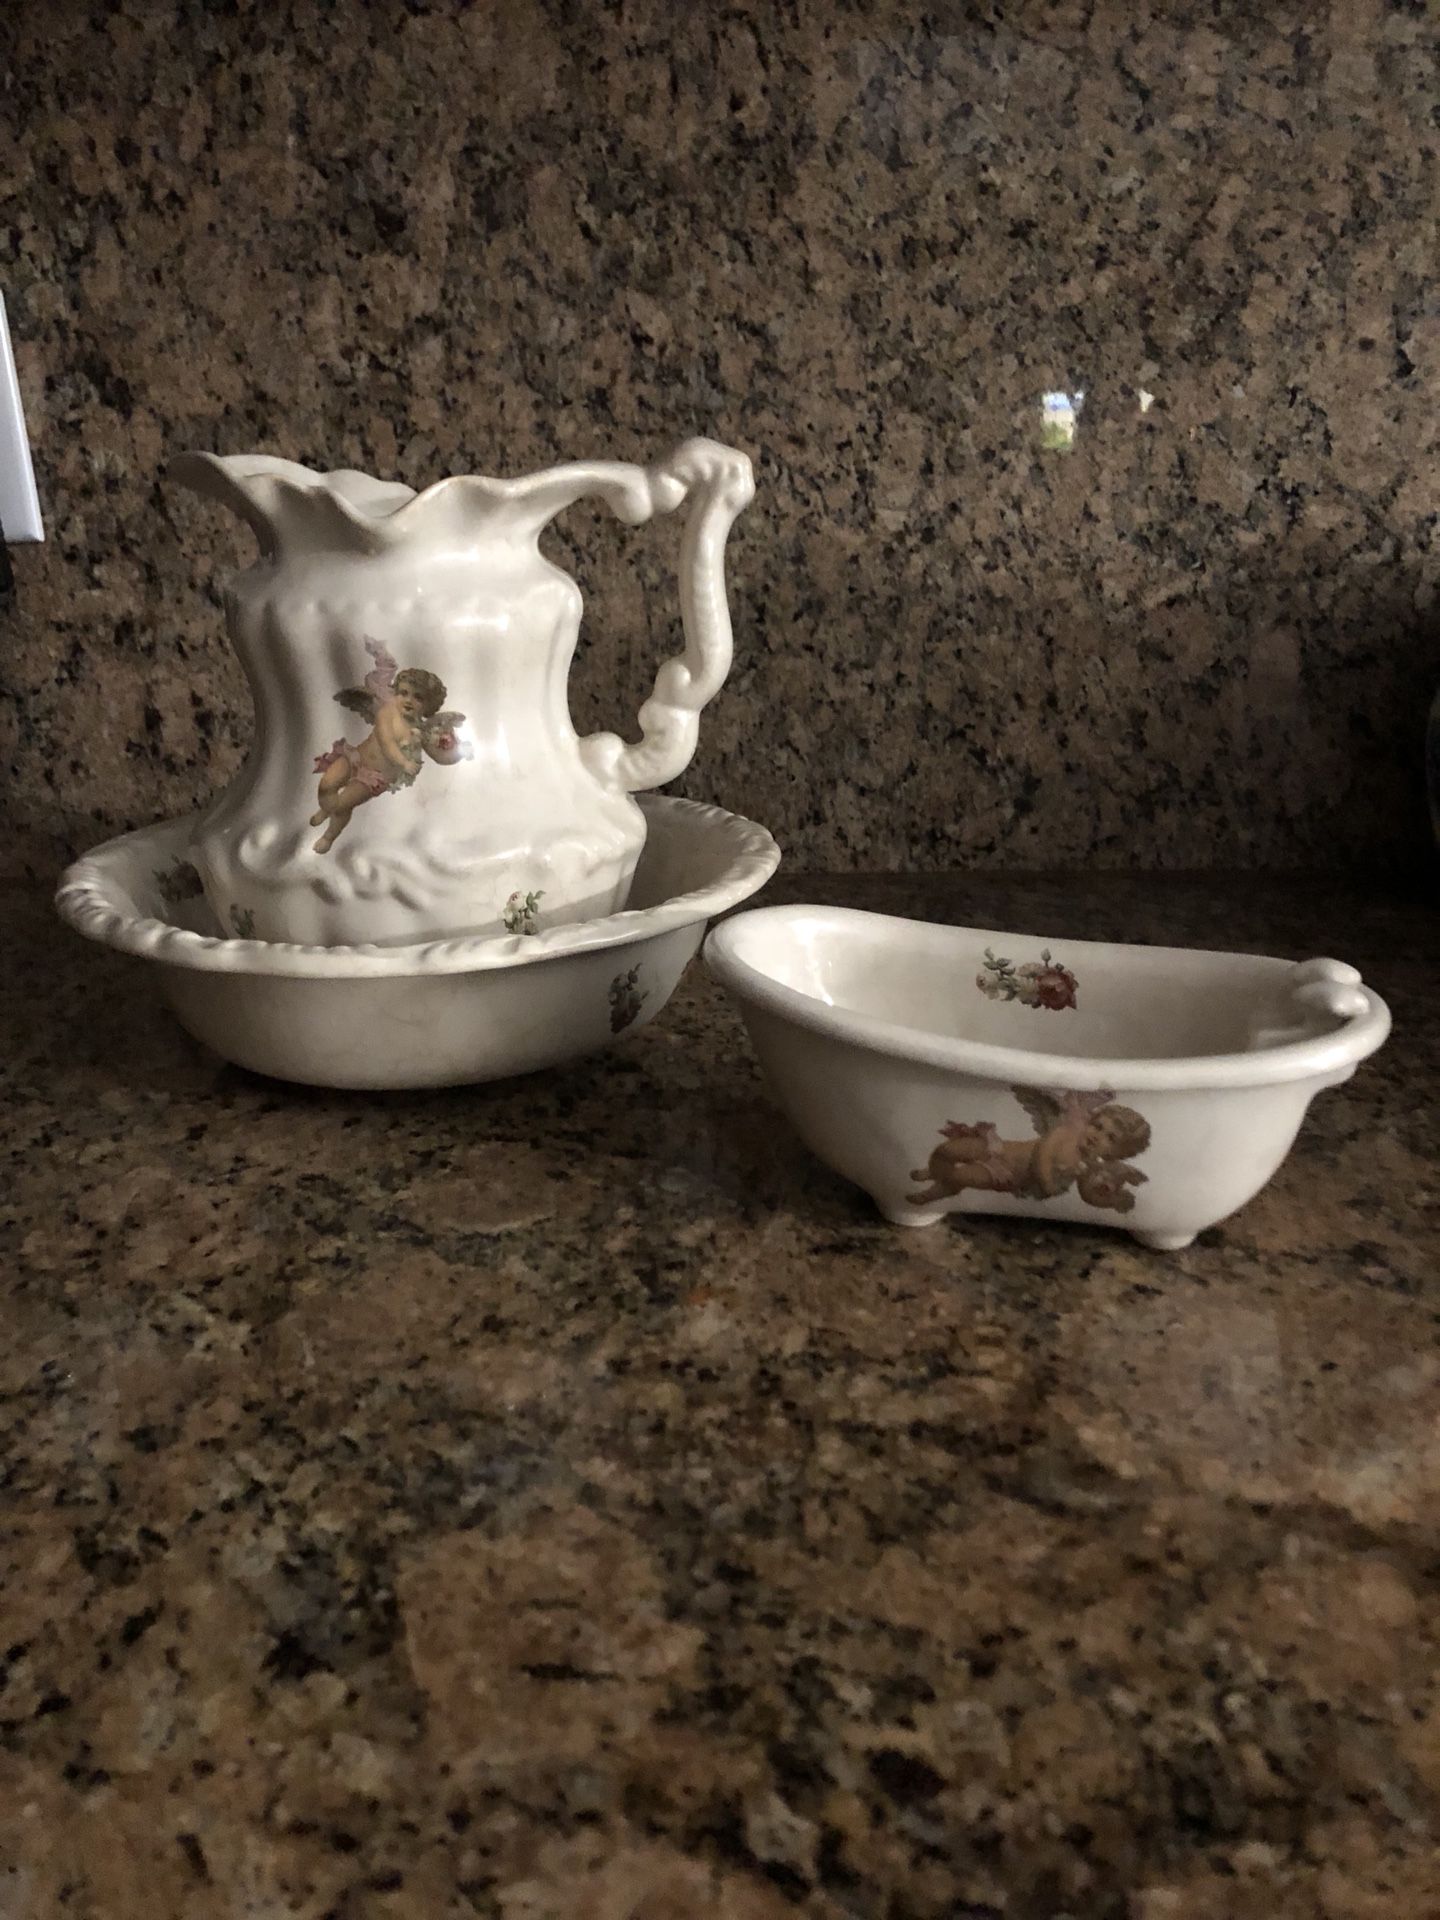 Antique ceramic angel pitcher, bowl, and soap tub